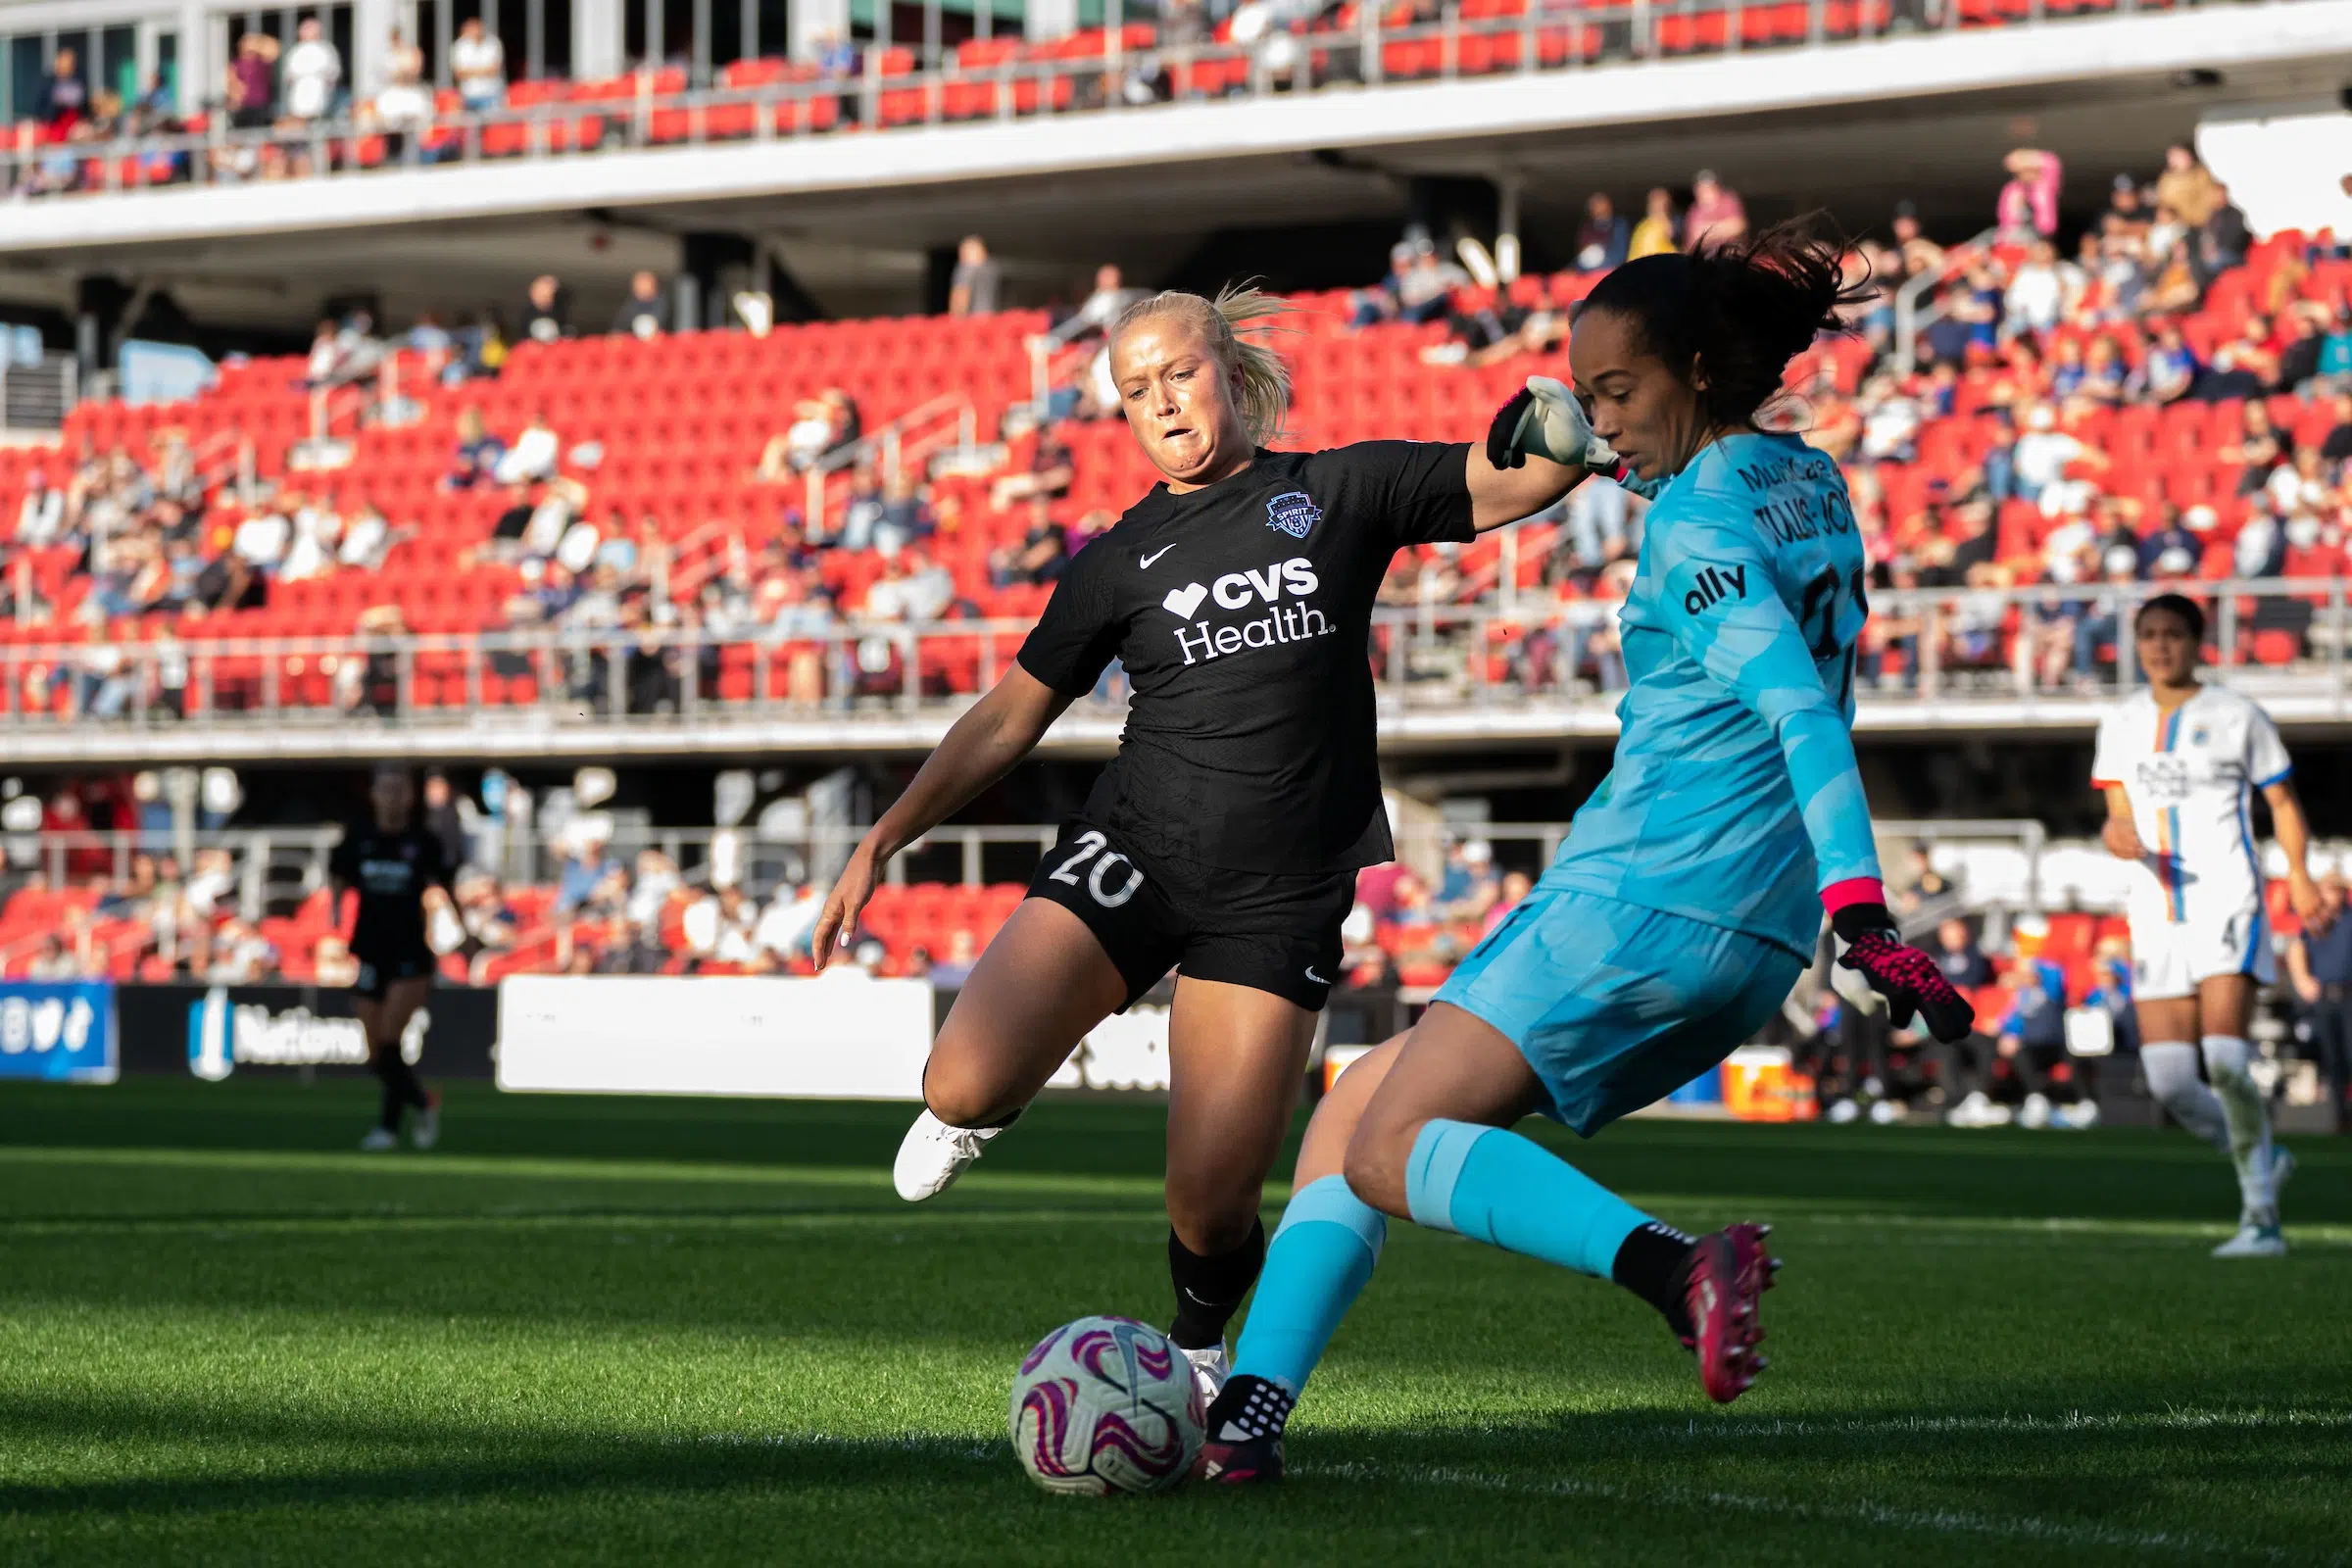 Civana Kuhlmann in a black uniform runs at a goalie in a bright uniform who is attempting to kick a soccer ball.